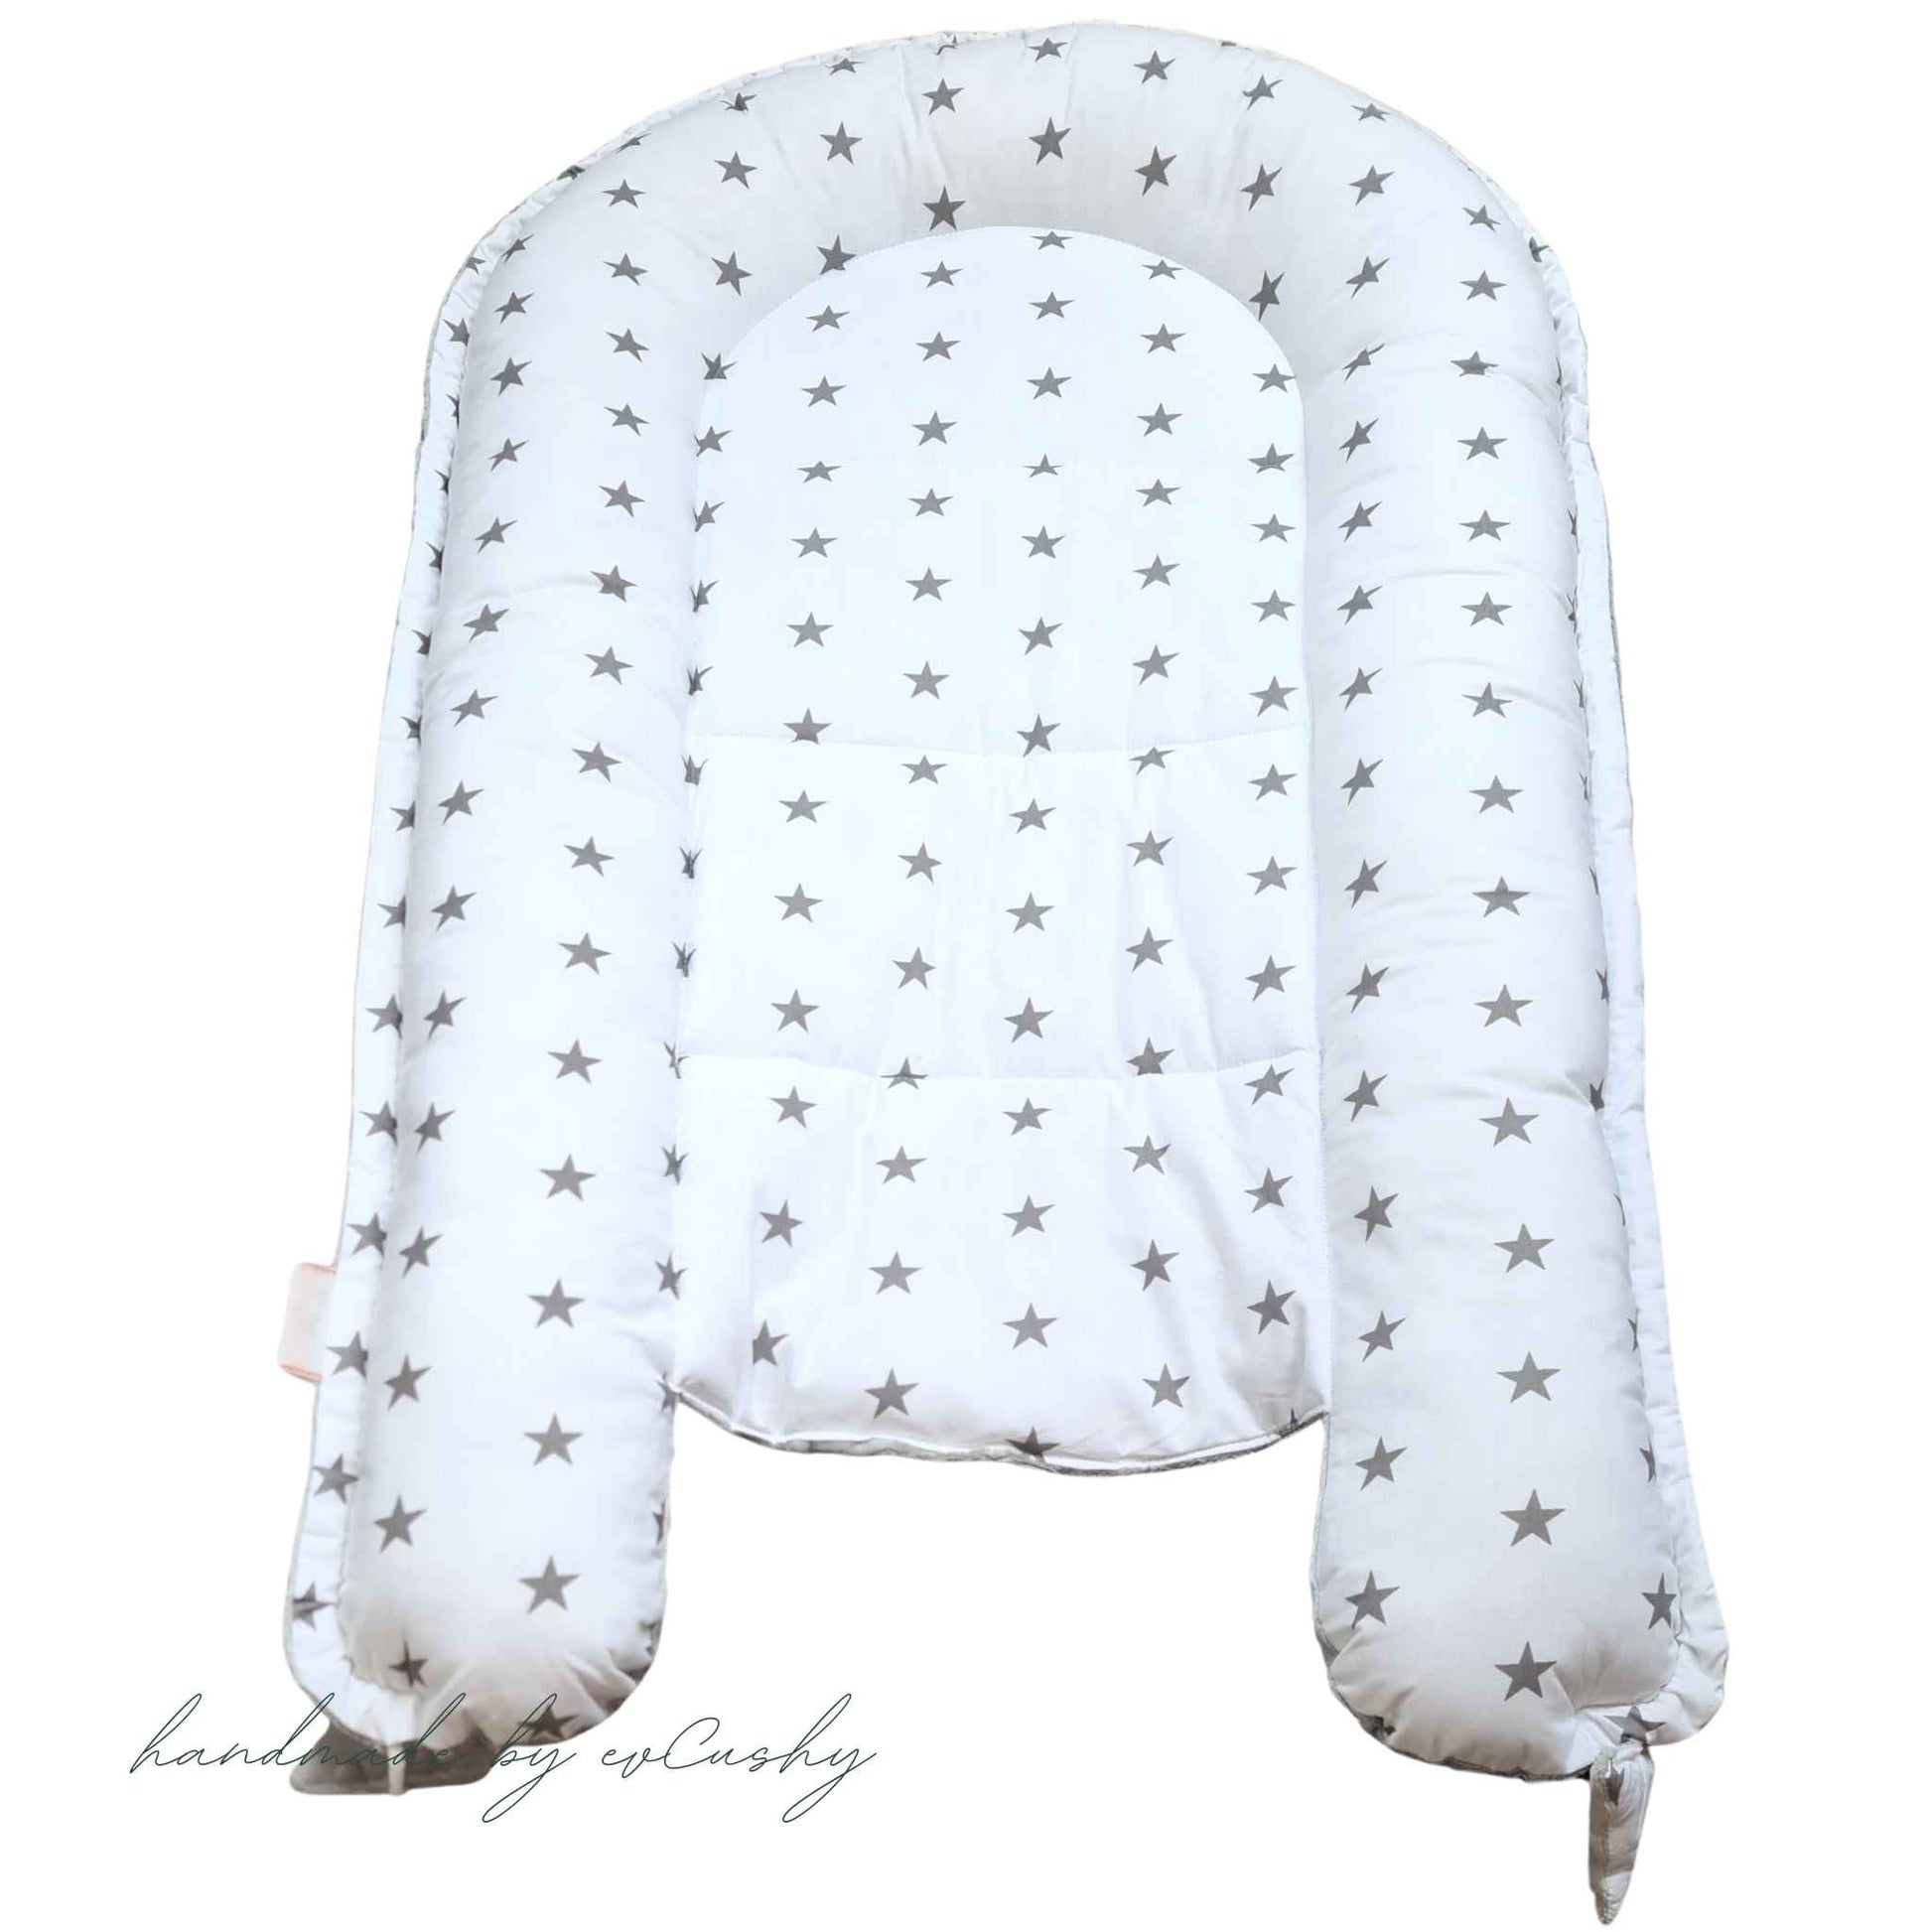 best baby nest with pillow and blanket white with grey stars and grey dimple fleece on reverse evcushy